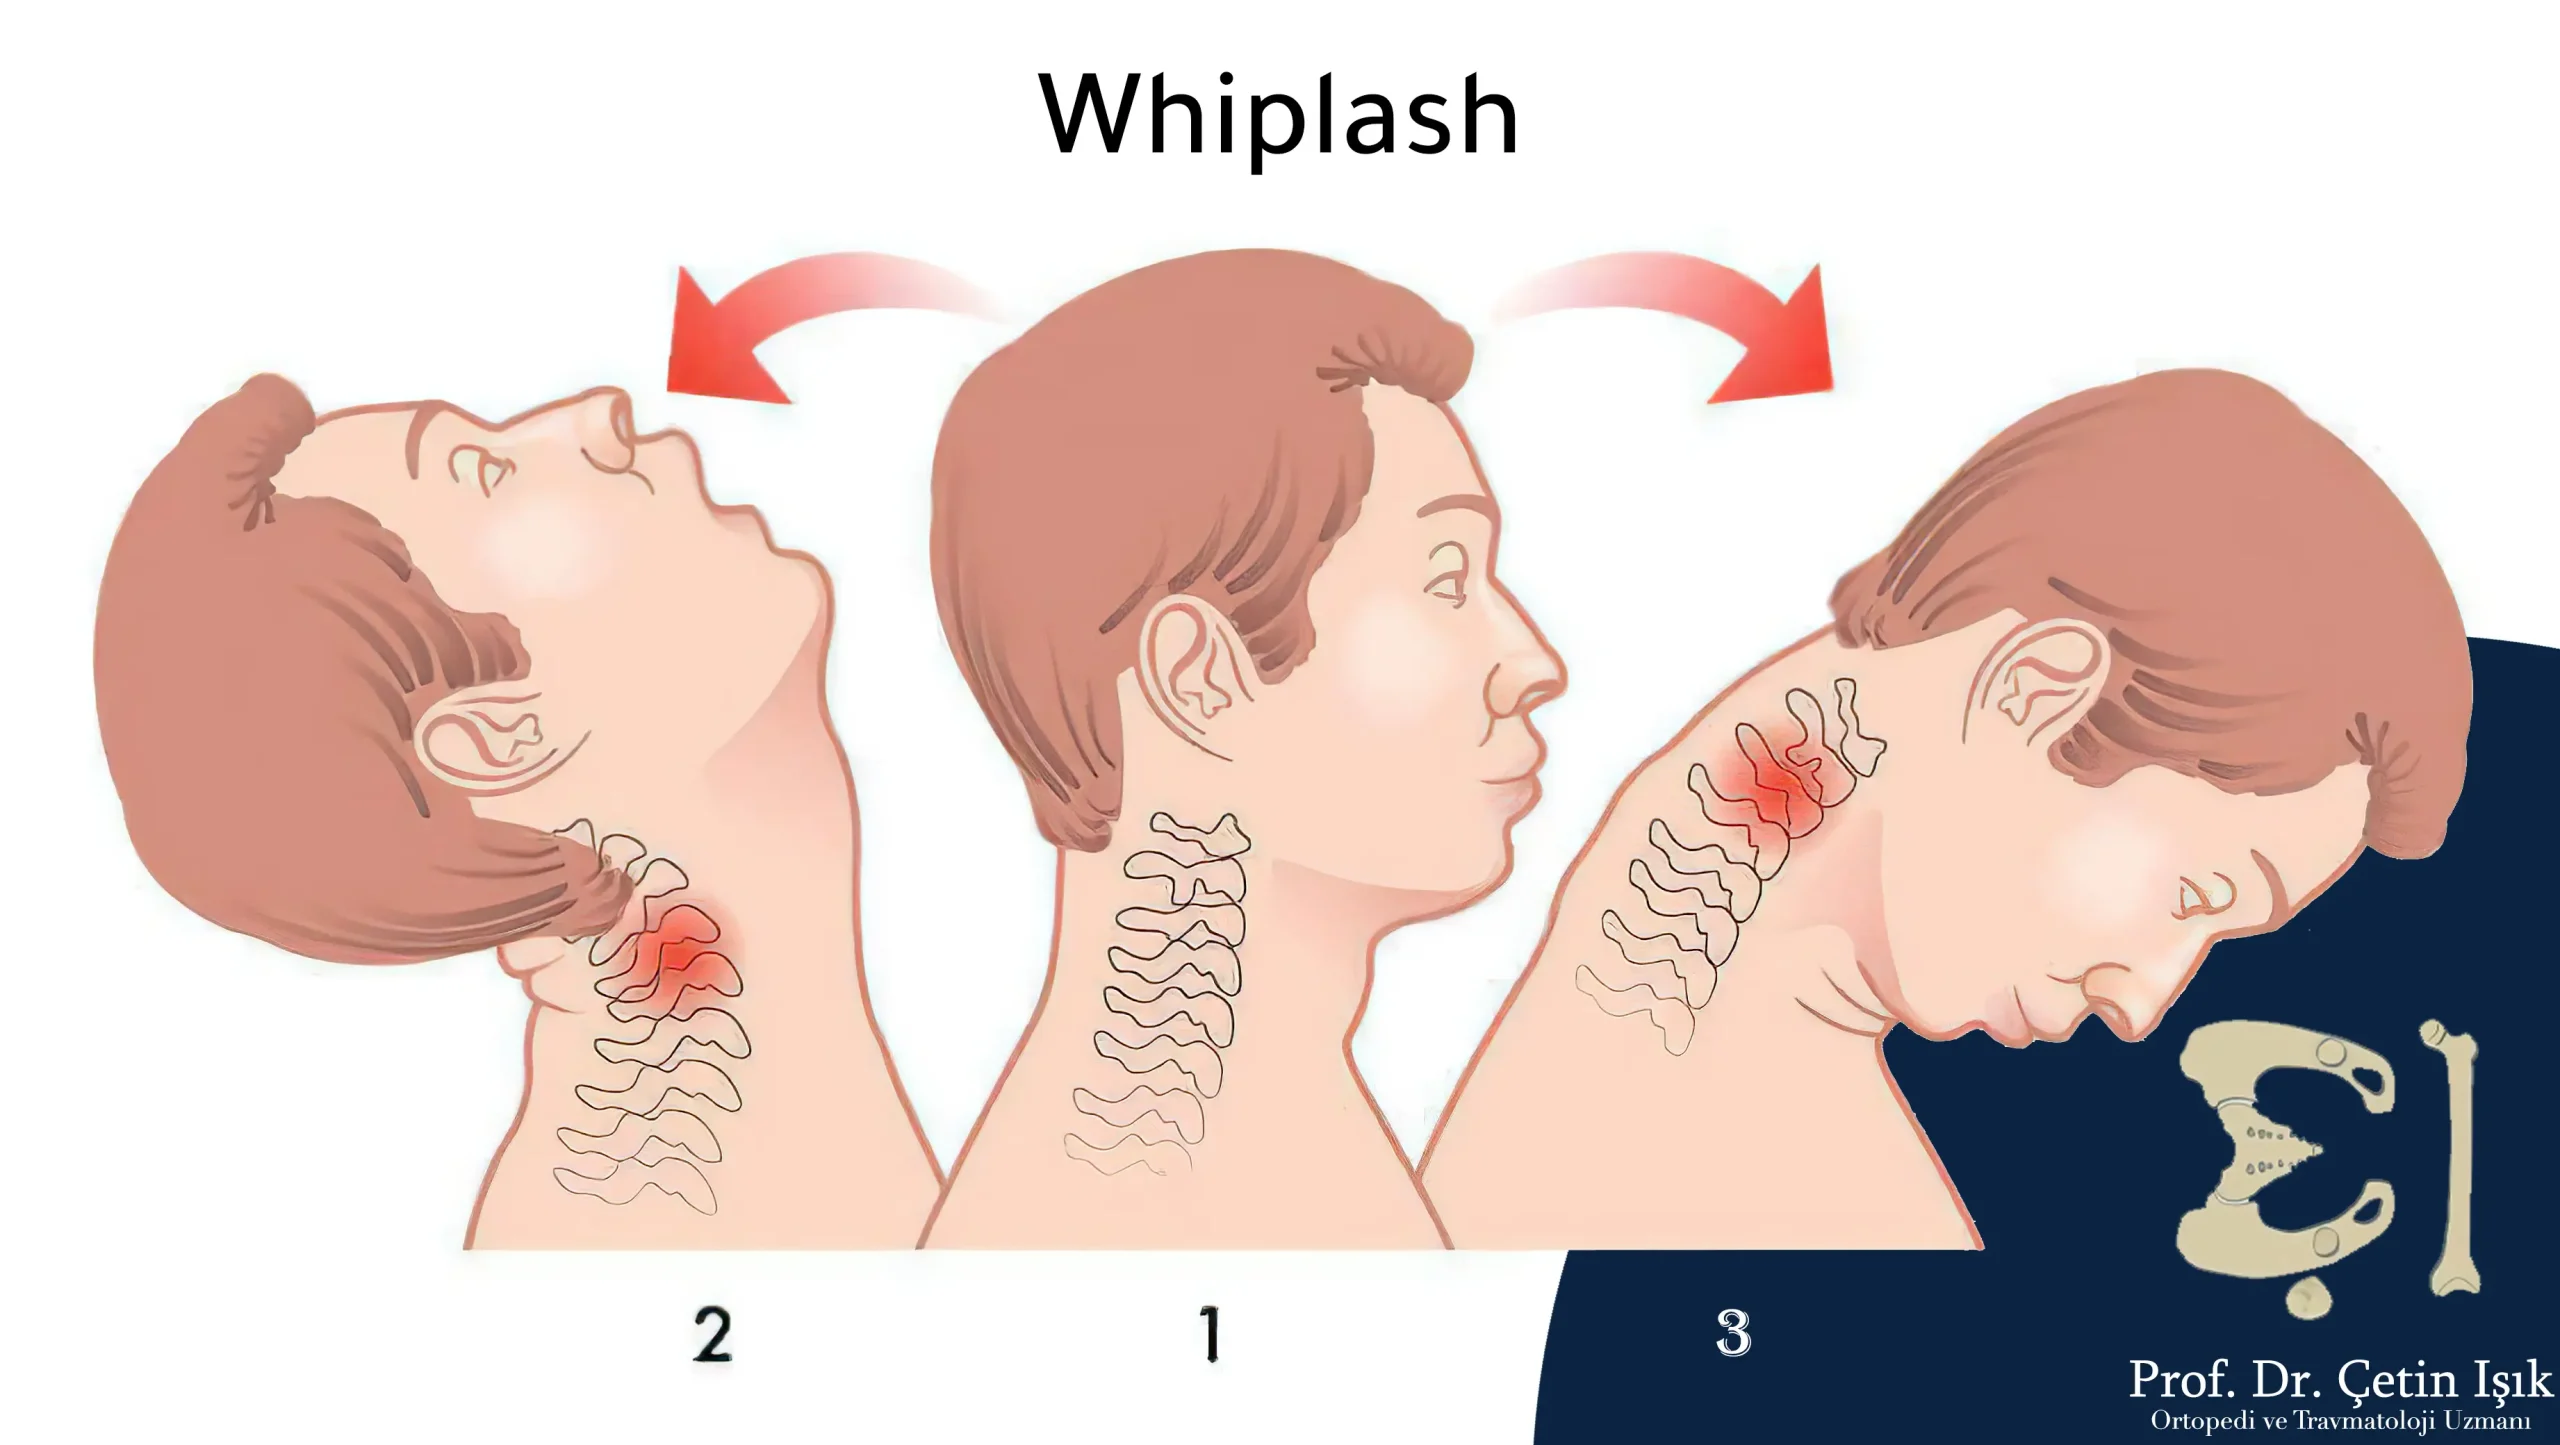 Image showing whiplash (rapid and sudden movement between hyperflexion and hyperextension) leading to neck twisting